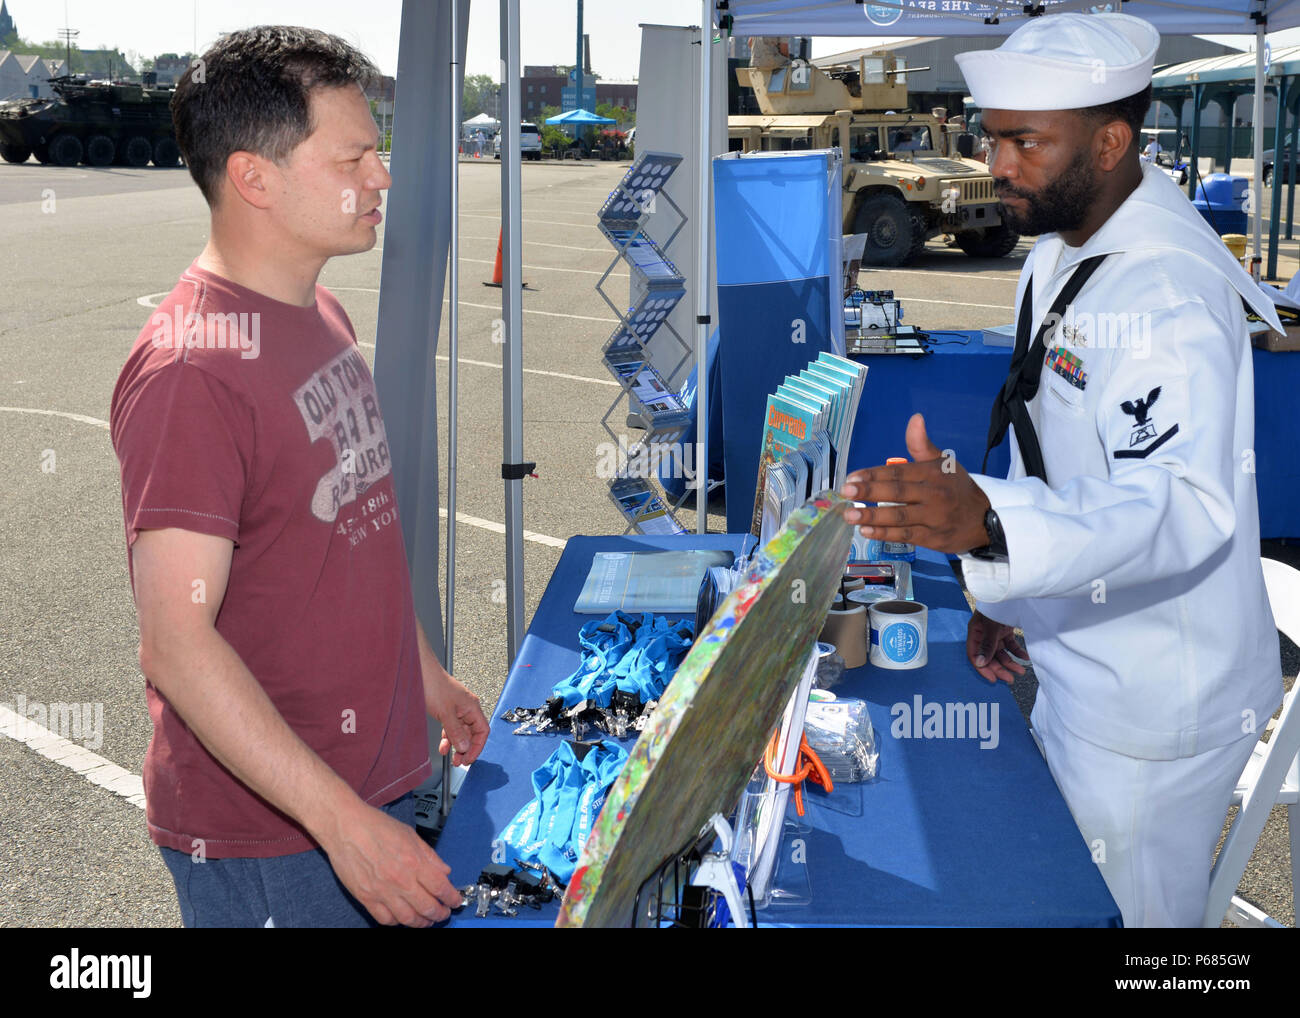 160528-N-IT235-001 NEW YORK (May 28, 2016) Culinary Specialist 3rd Class Jeffrey Harrison, from Cantonment, Fla., and stationed aboard the Arleigh Burke-class destroyer USS Farragut (DDG 99), explains plastic waste processing with a visitor at the 'Stewards of the Sea: Defending Freedom, Protecting the Environment' exhibit at the Brooklyn Cruise Terminal during Fleet Week New York 2016.  The Navy employs every means available to mitigate the potential environmental effects of our activities without jeopardizing the safety of our Sailors or impacting our Navy readiness mission. (U.S. Navy photo Stock Photo